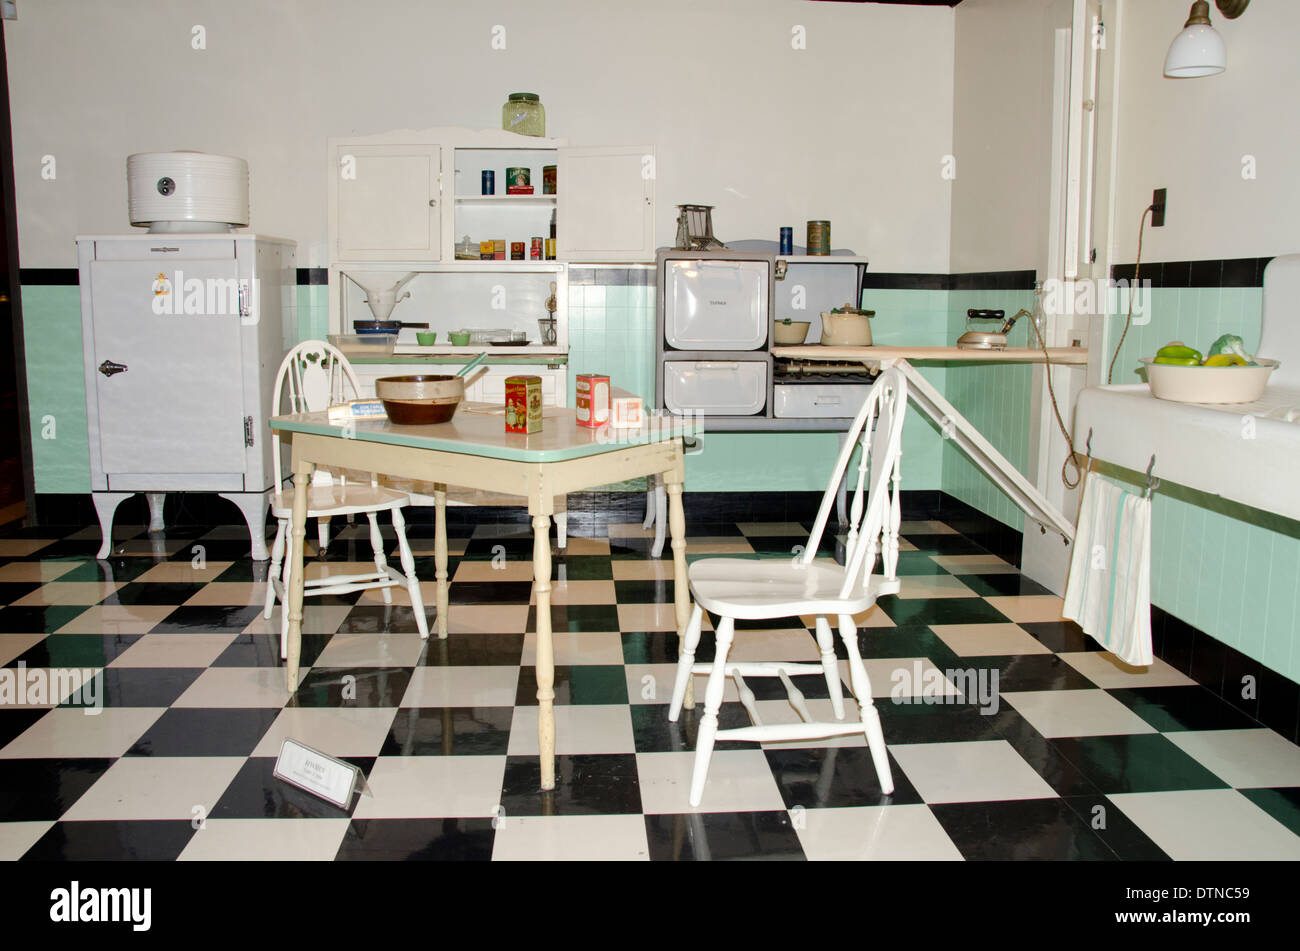 Michigan, Dearborn. Henry Ford Museum, National Historic Landmark. 1930's middle-class American kitchen. Stock Photo